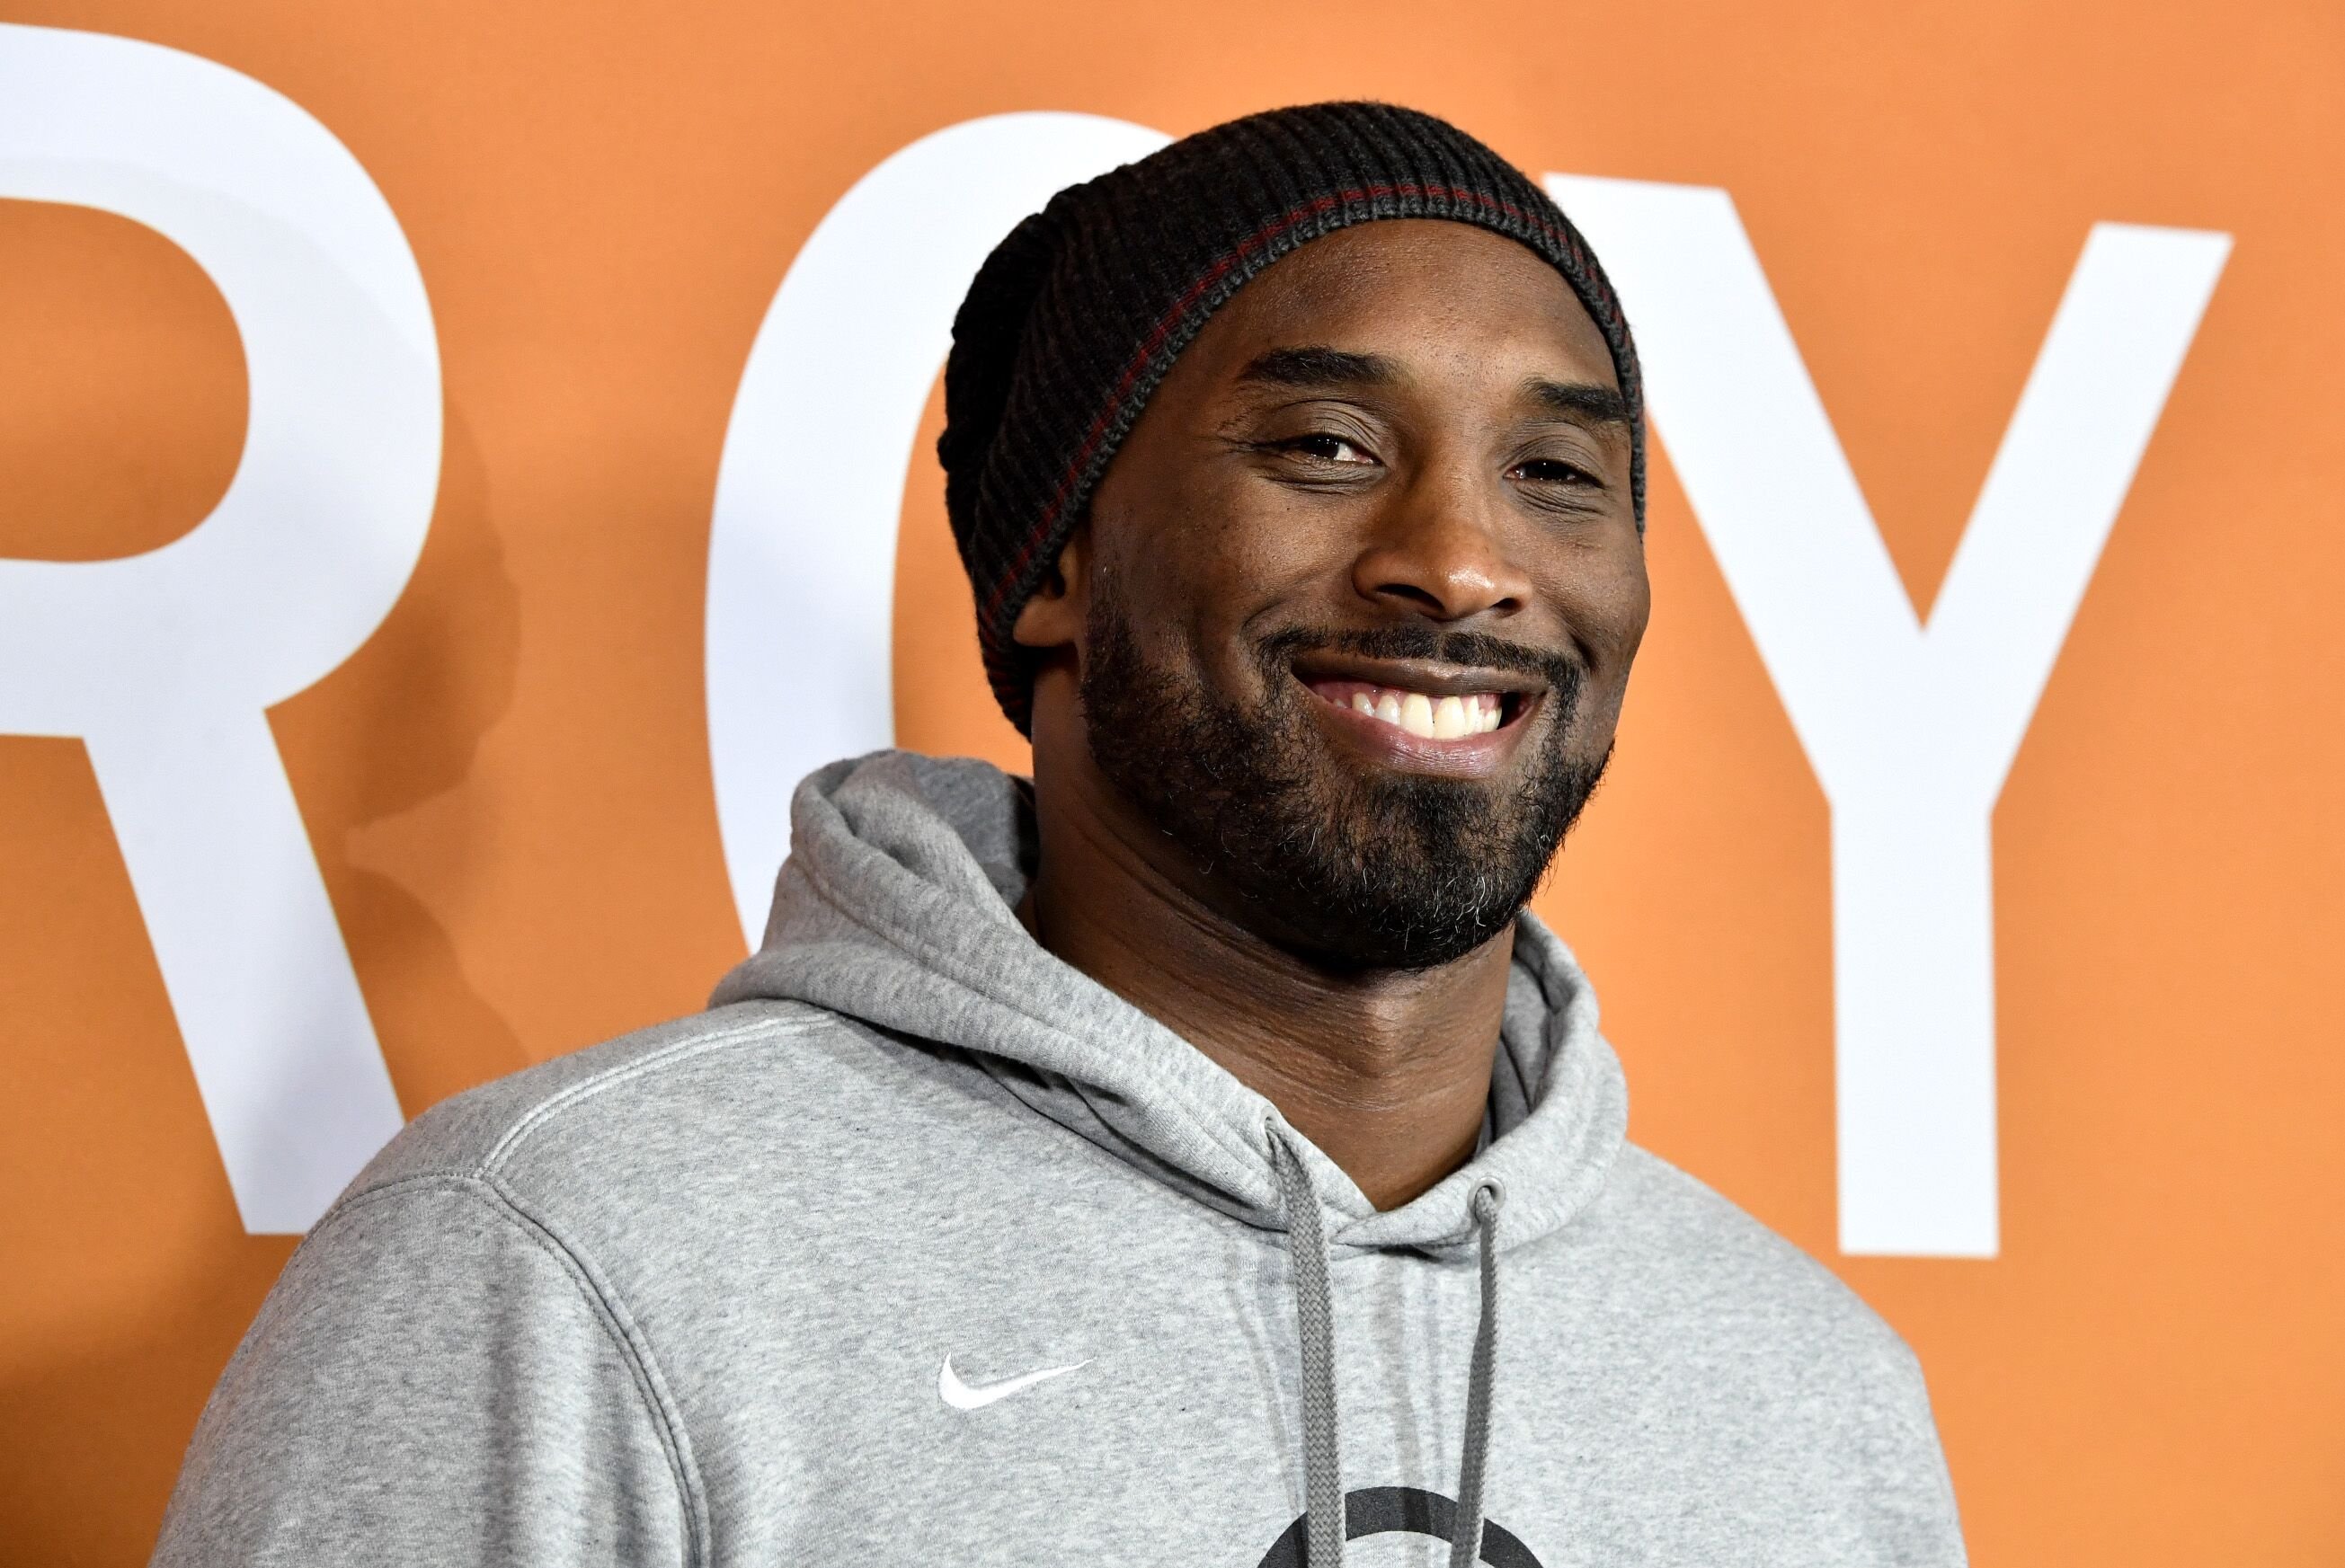 Kobe Bryant at the LA Community screening of "Just Mercy". | Photo: Getty Images